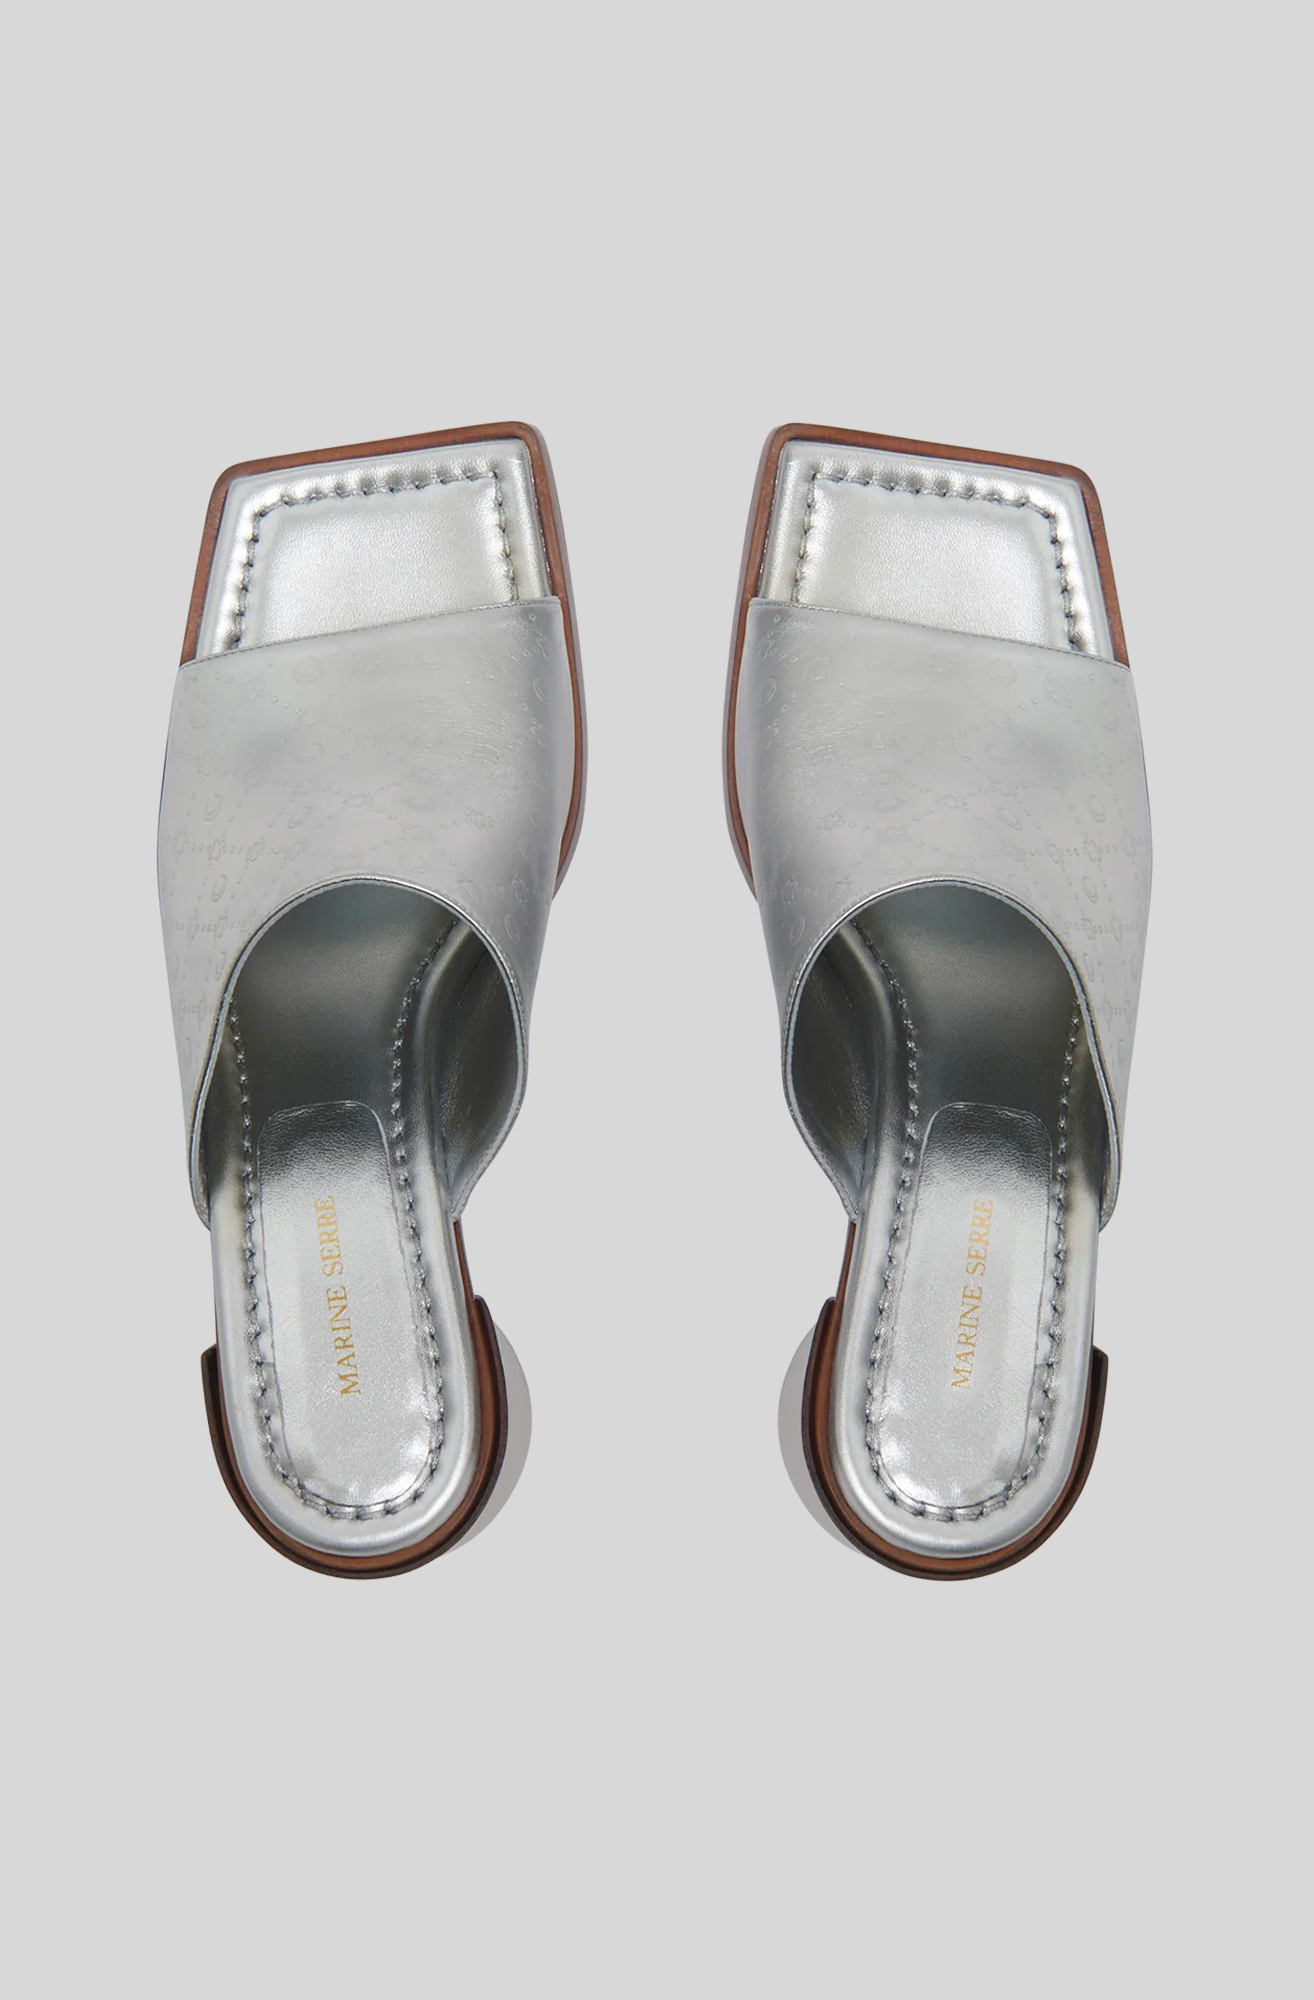 LAMINATED LEATHER MS MULES